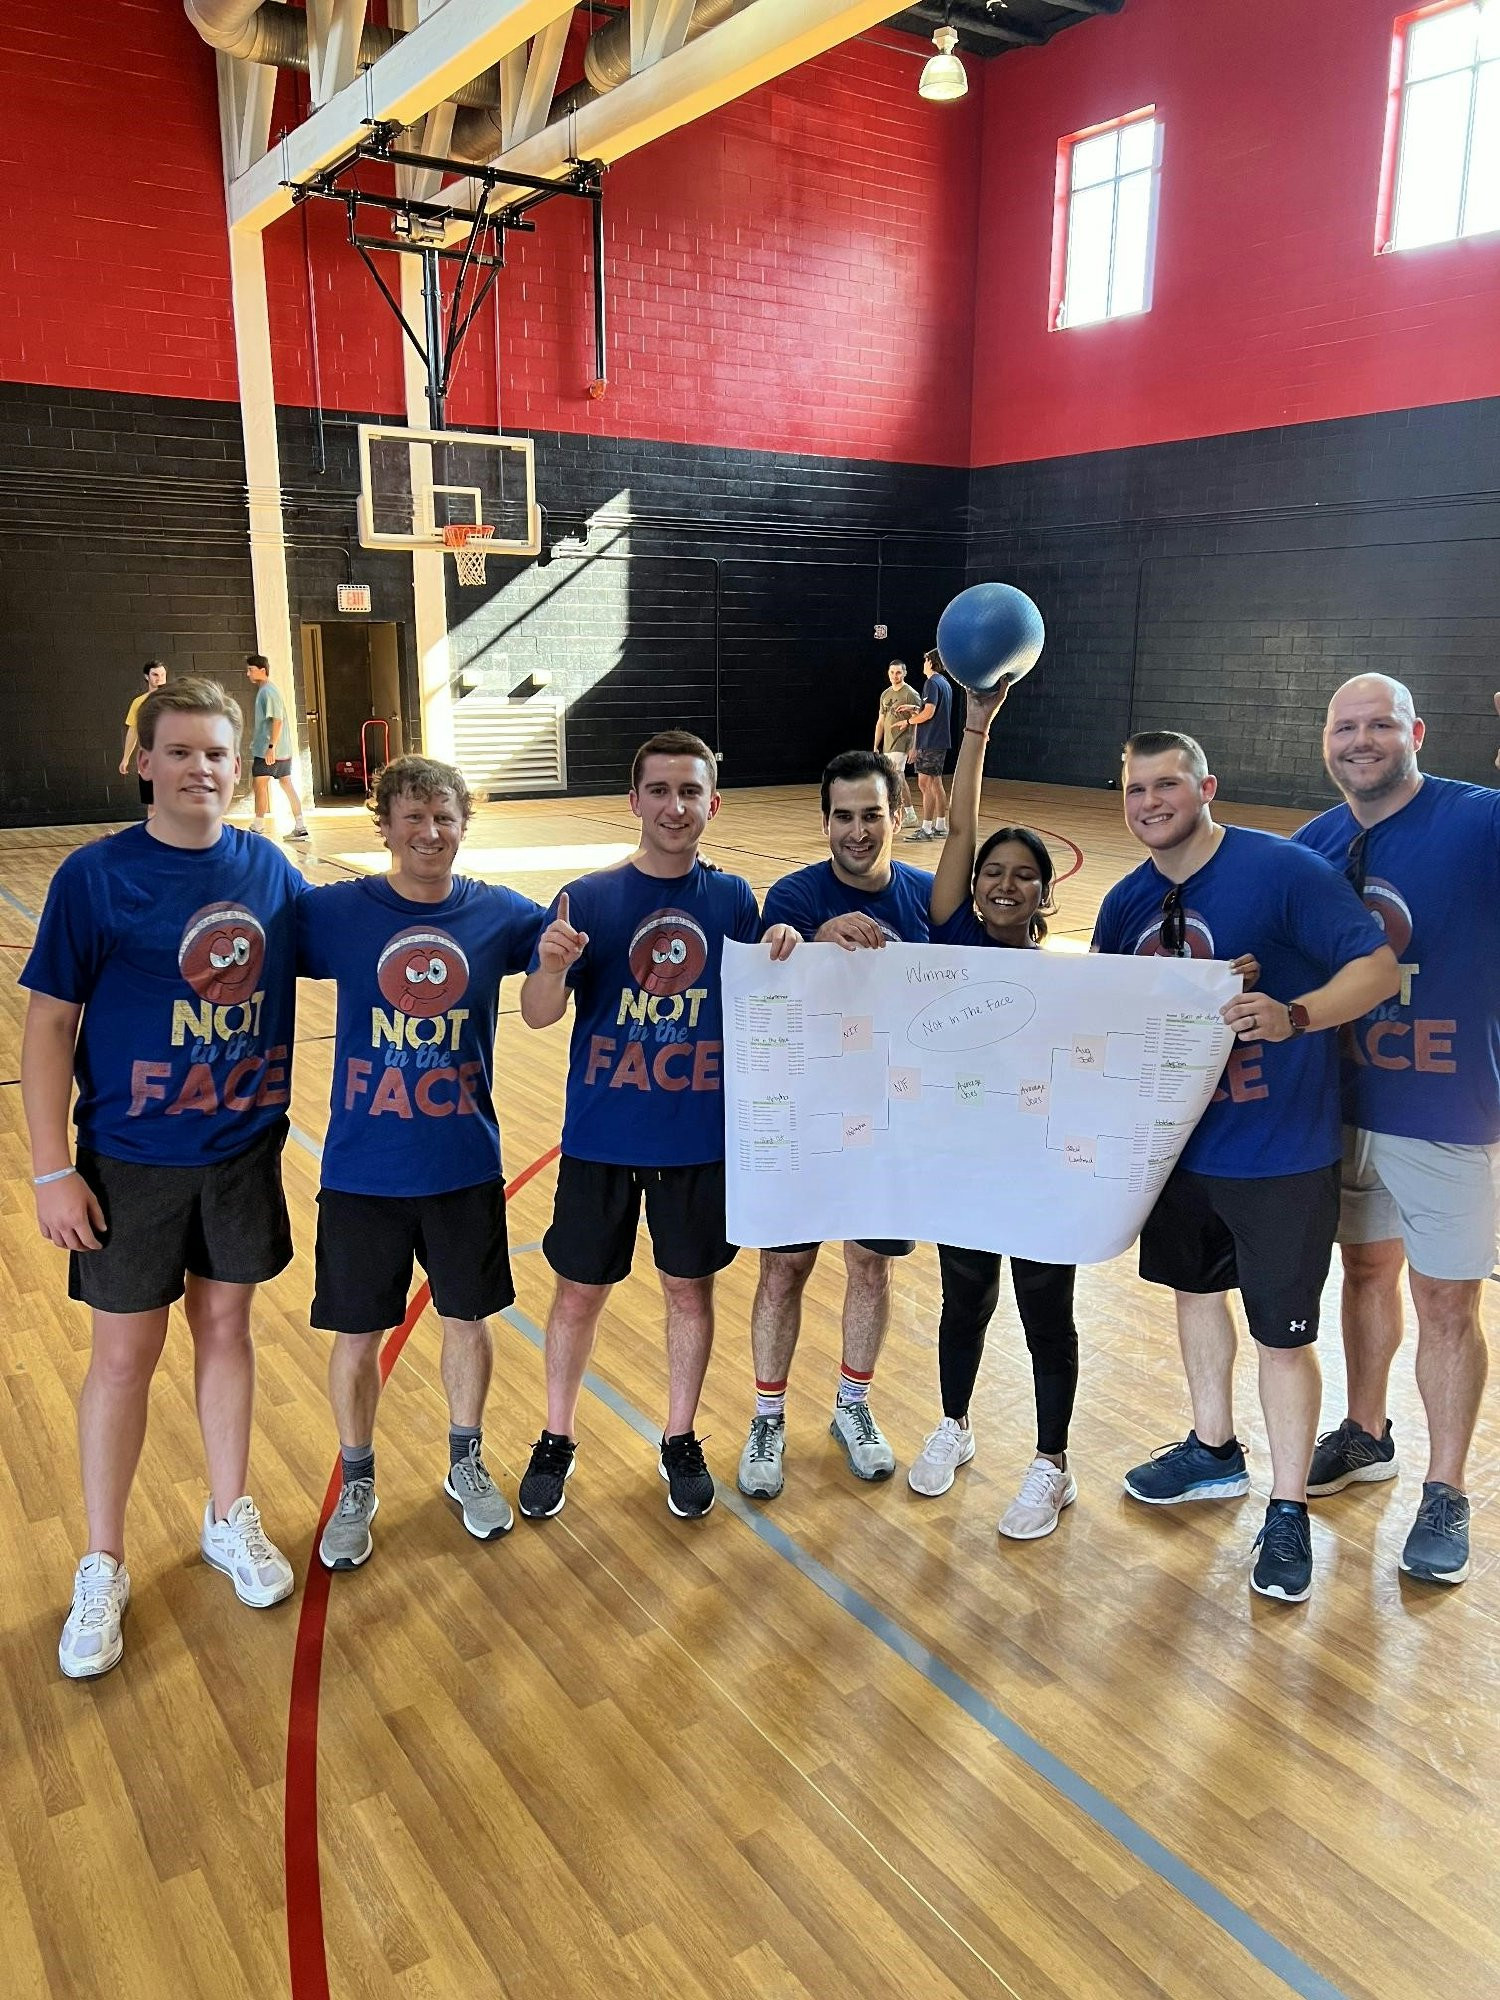 Winners of our annual dodgeball tournament.